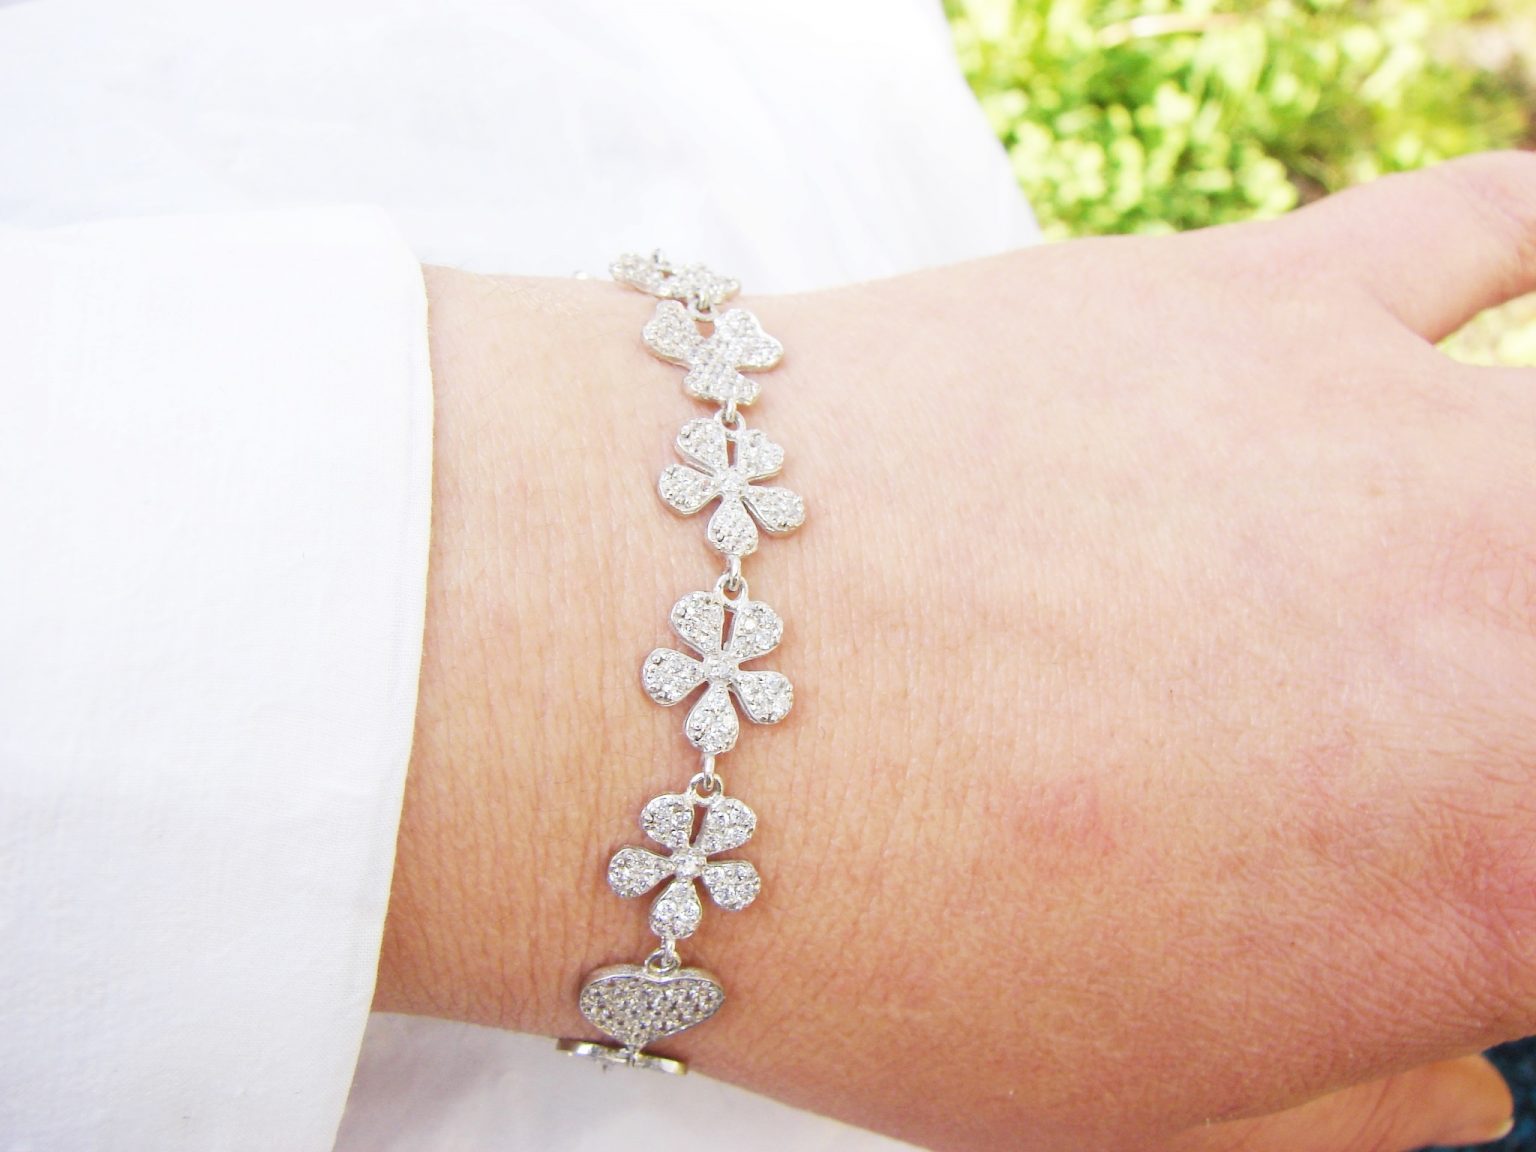 Bracelet Hearts & Flowers Sterling Silver 925 with Sparkling Zircons